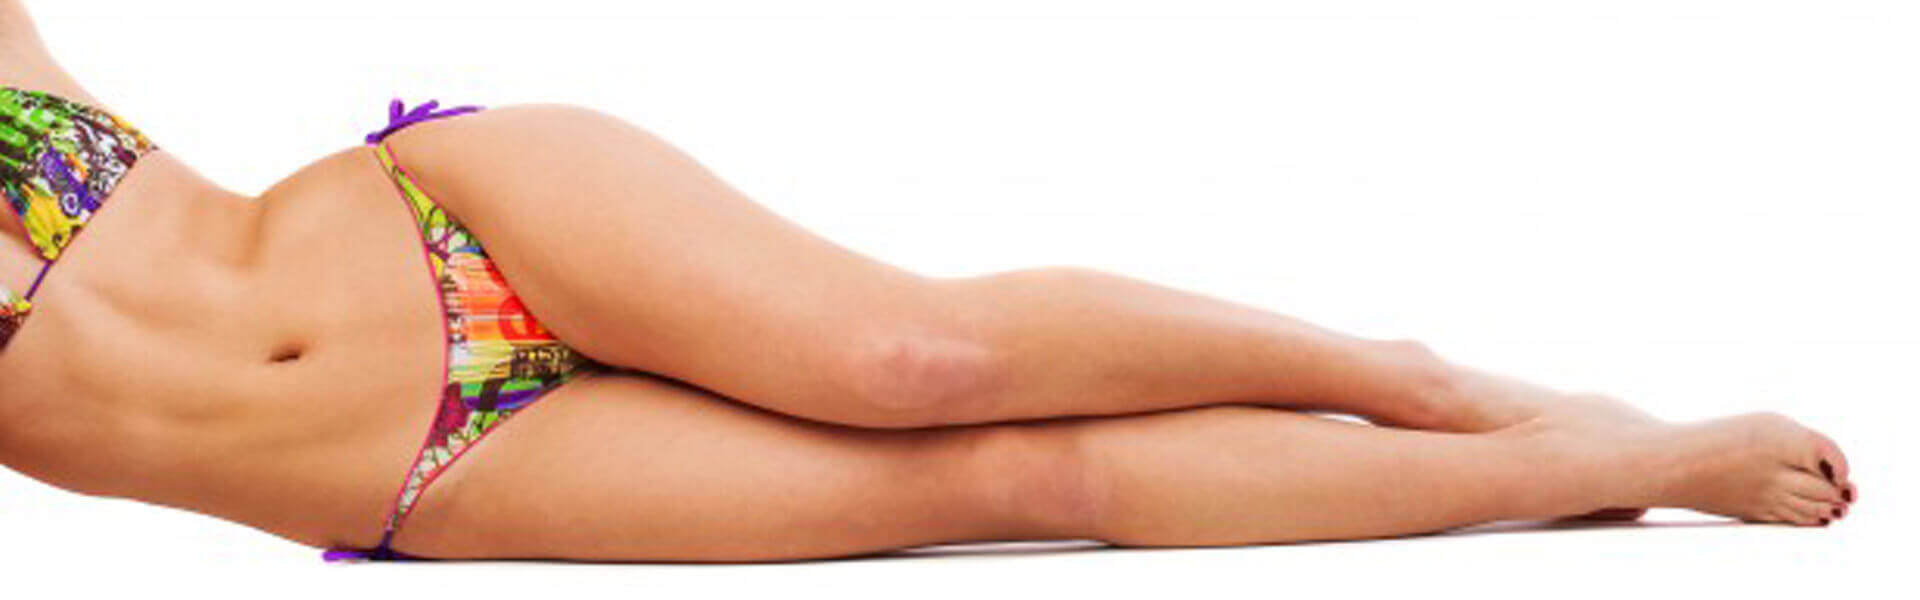 Picture of a female laying on her side proud of her well shaped legs after having her liposuction done at Nova Plastic Surgery Center in Guadalajara, Mexico.